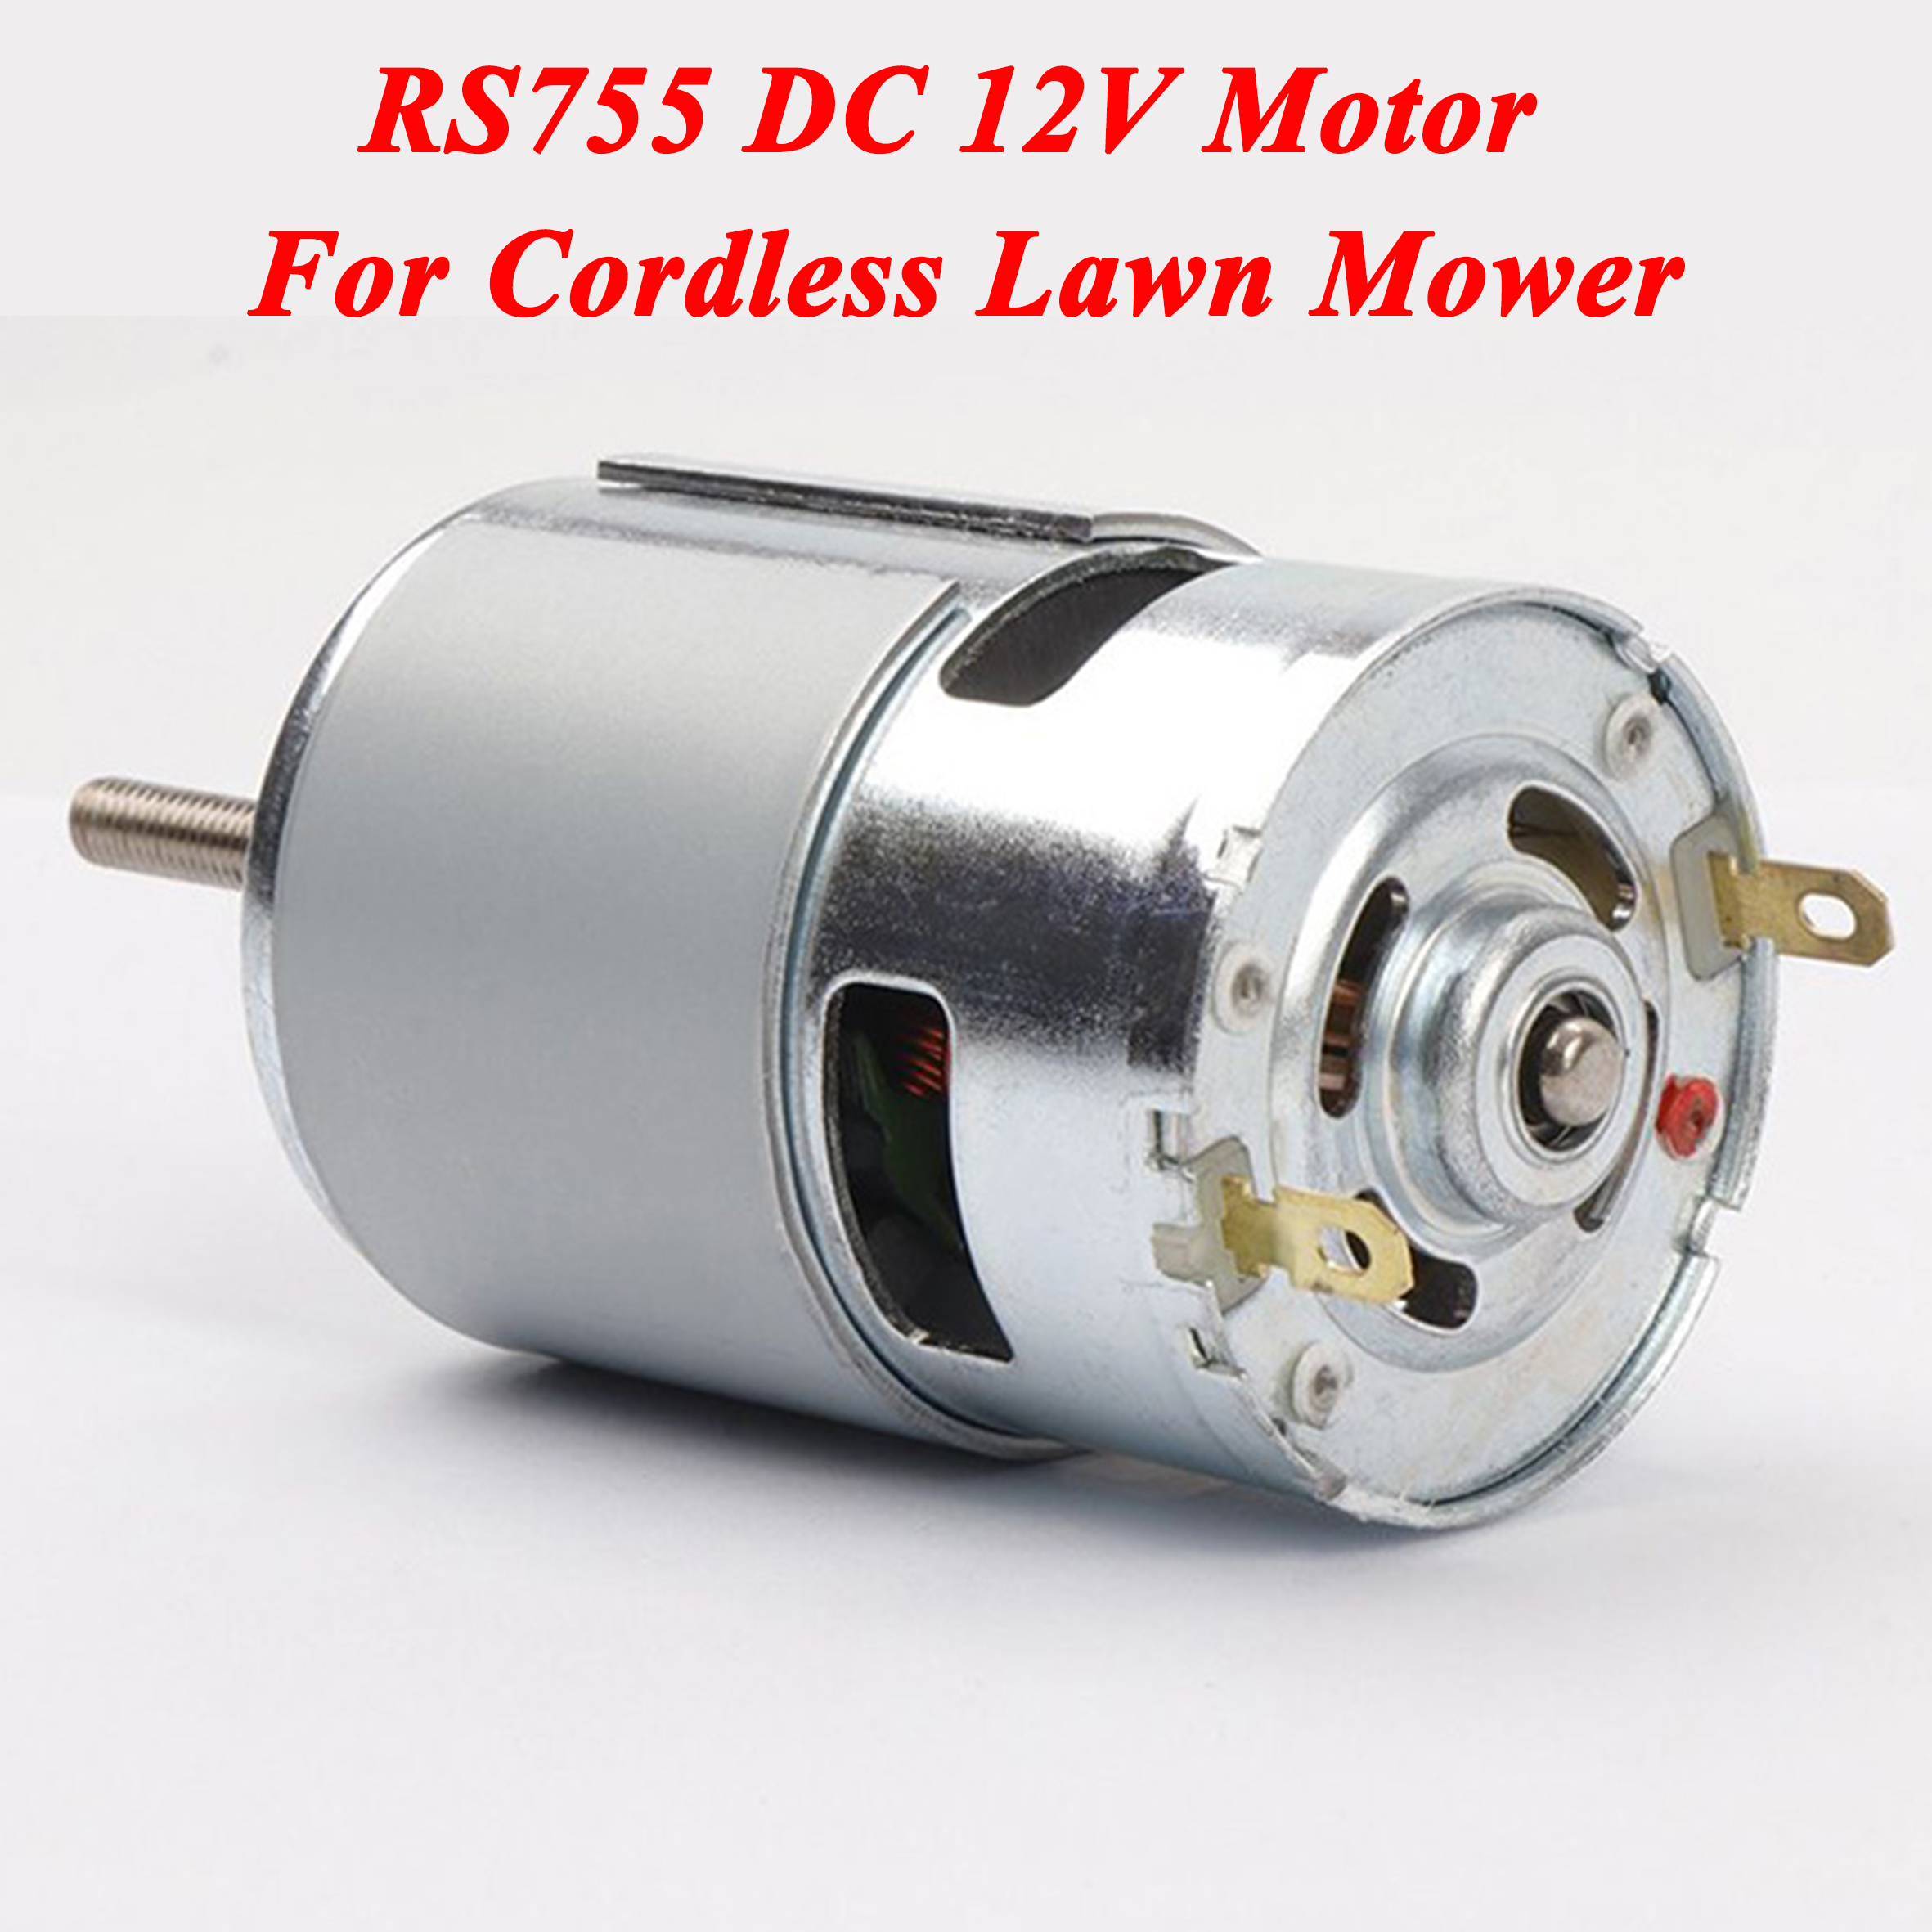 RS755 12V Motor for Cordless Grass Cutter or Lawn Mower